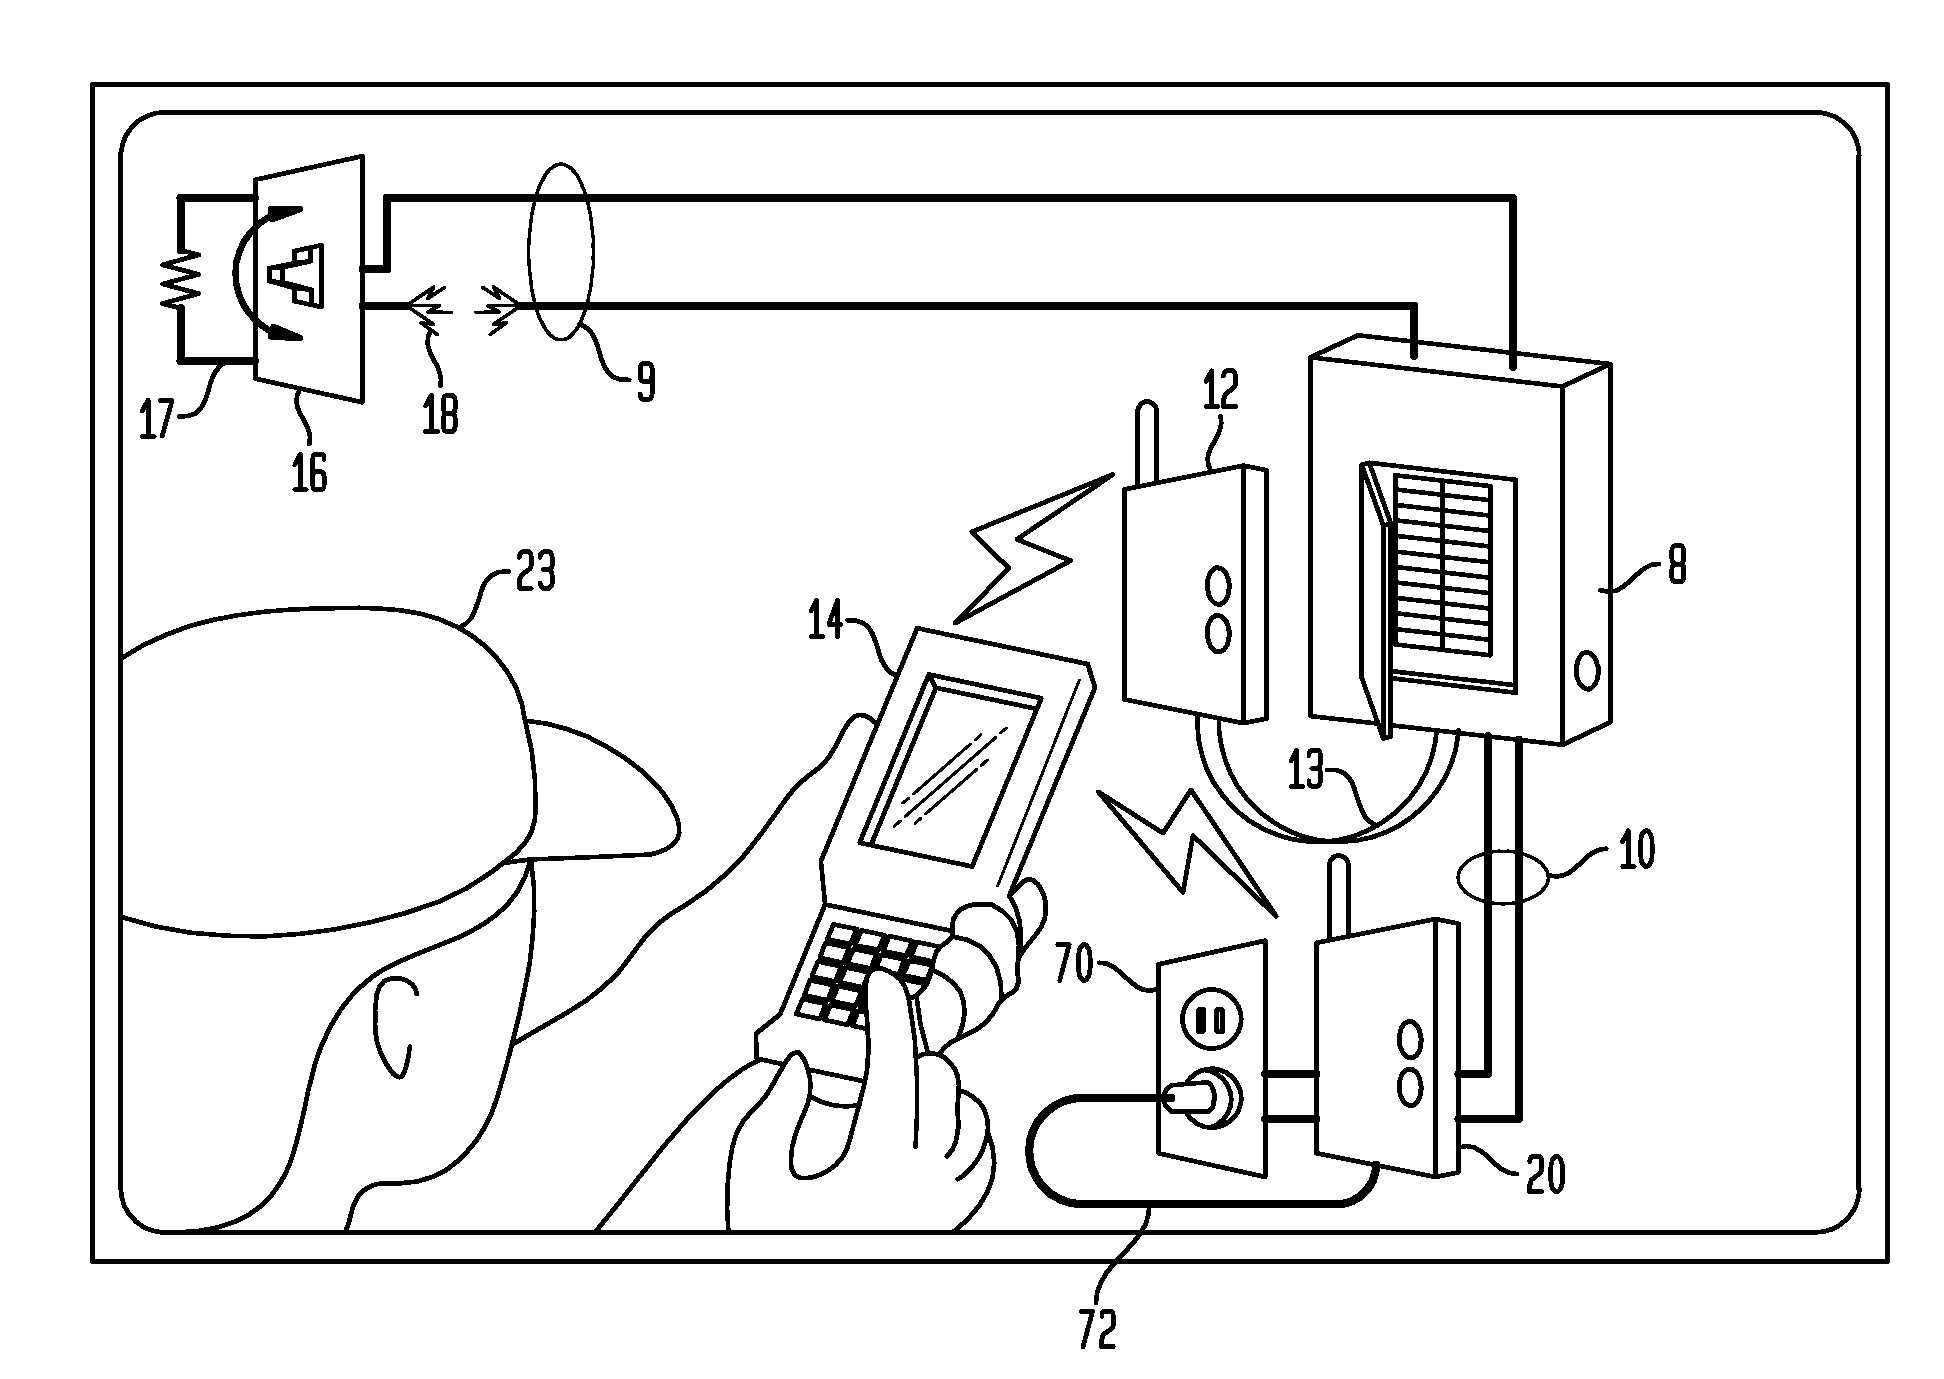 Arc fault root-cause finder system and method